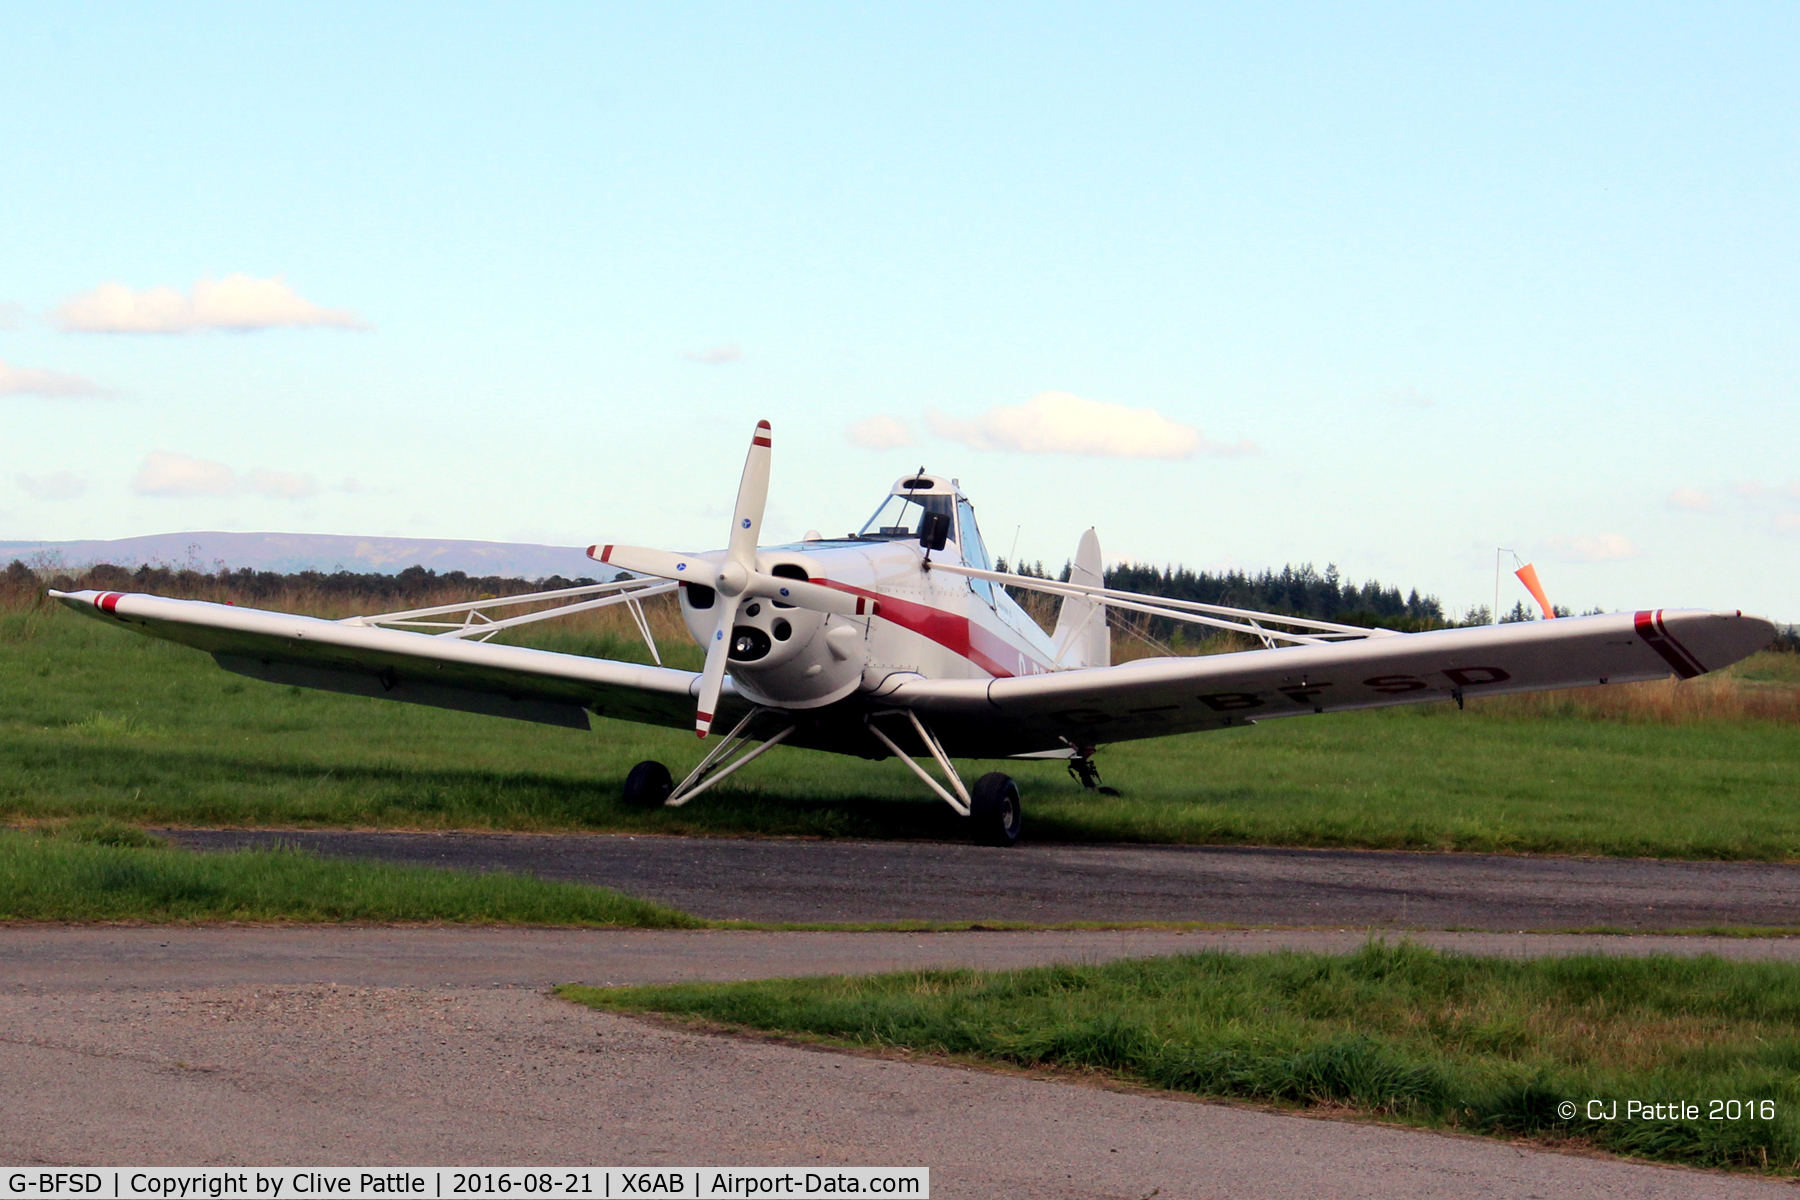 G-BFSD, 1976 Piper PA-25-235 Pawnee C/N 25-7656084, At Aboyne for Glider Towing duties